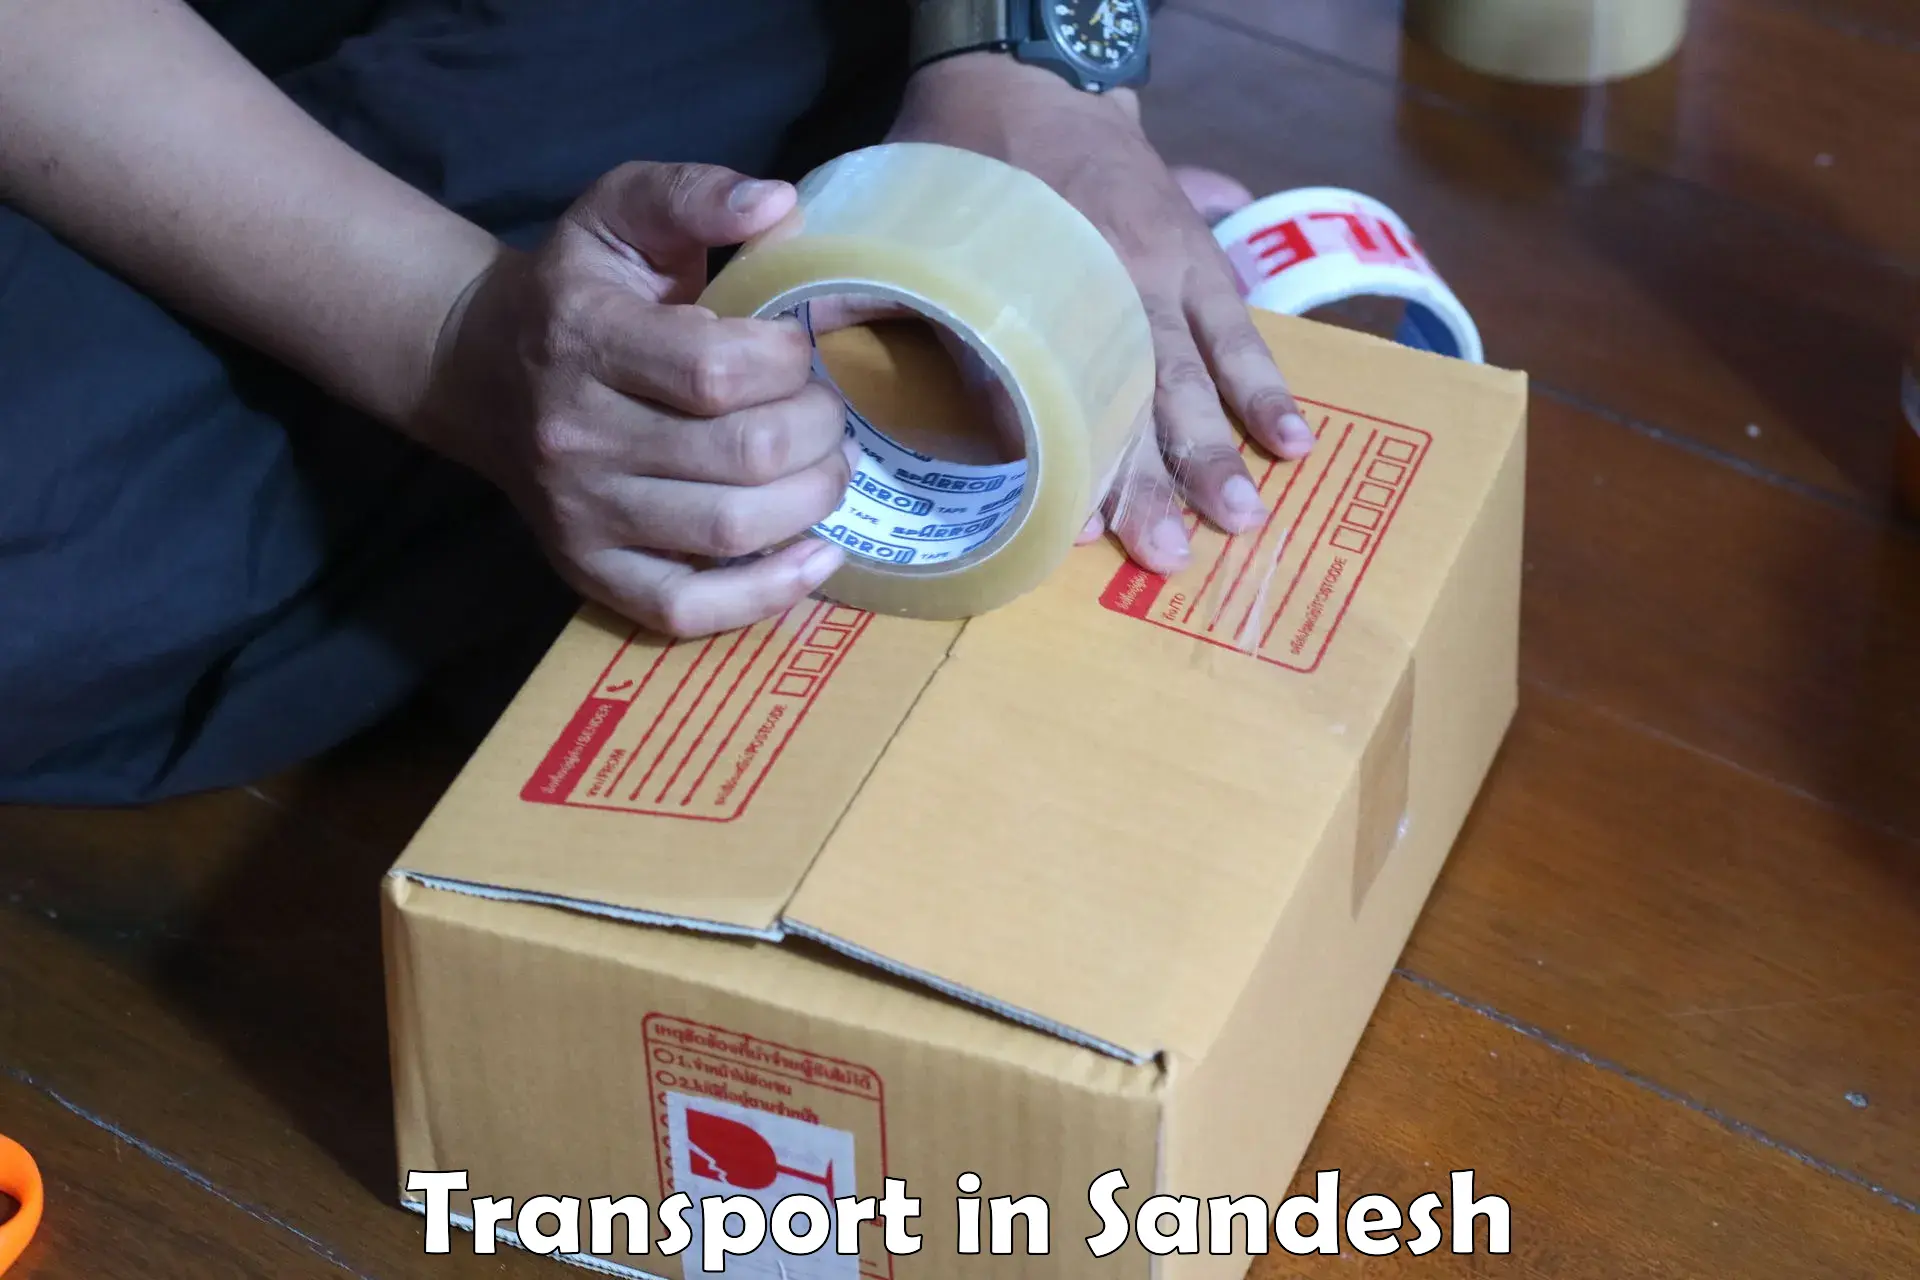 Daily transport service in Sandesh